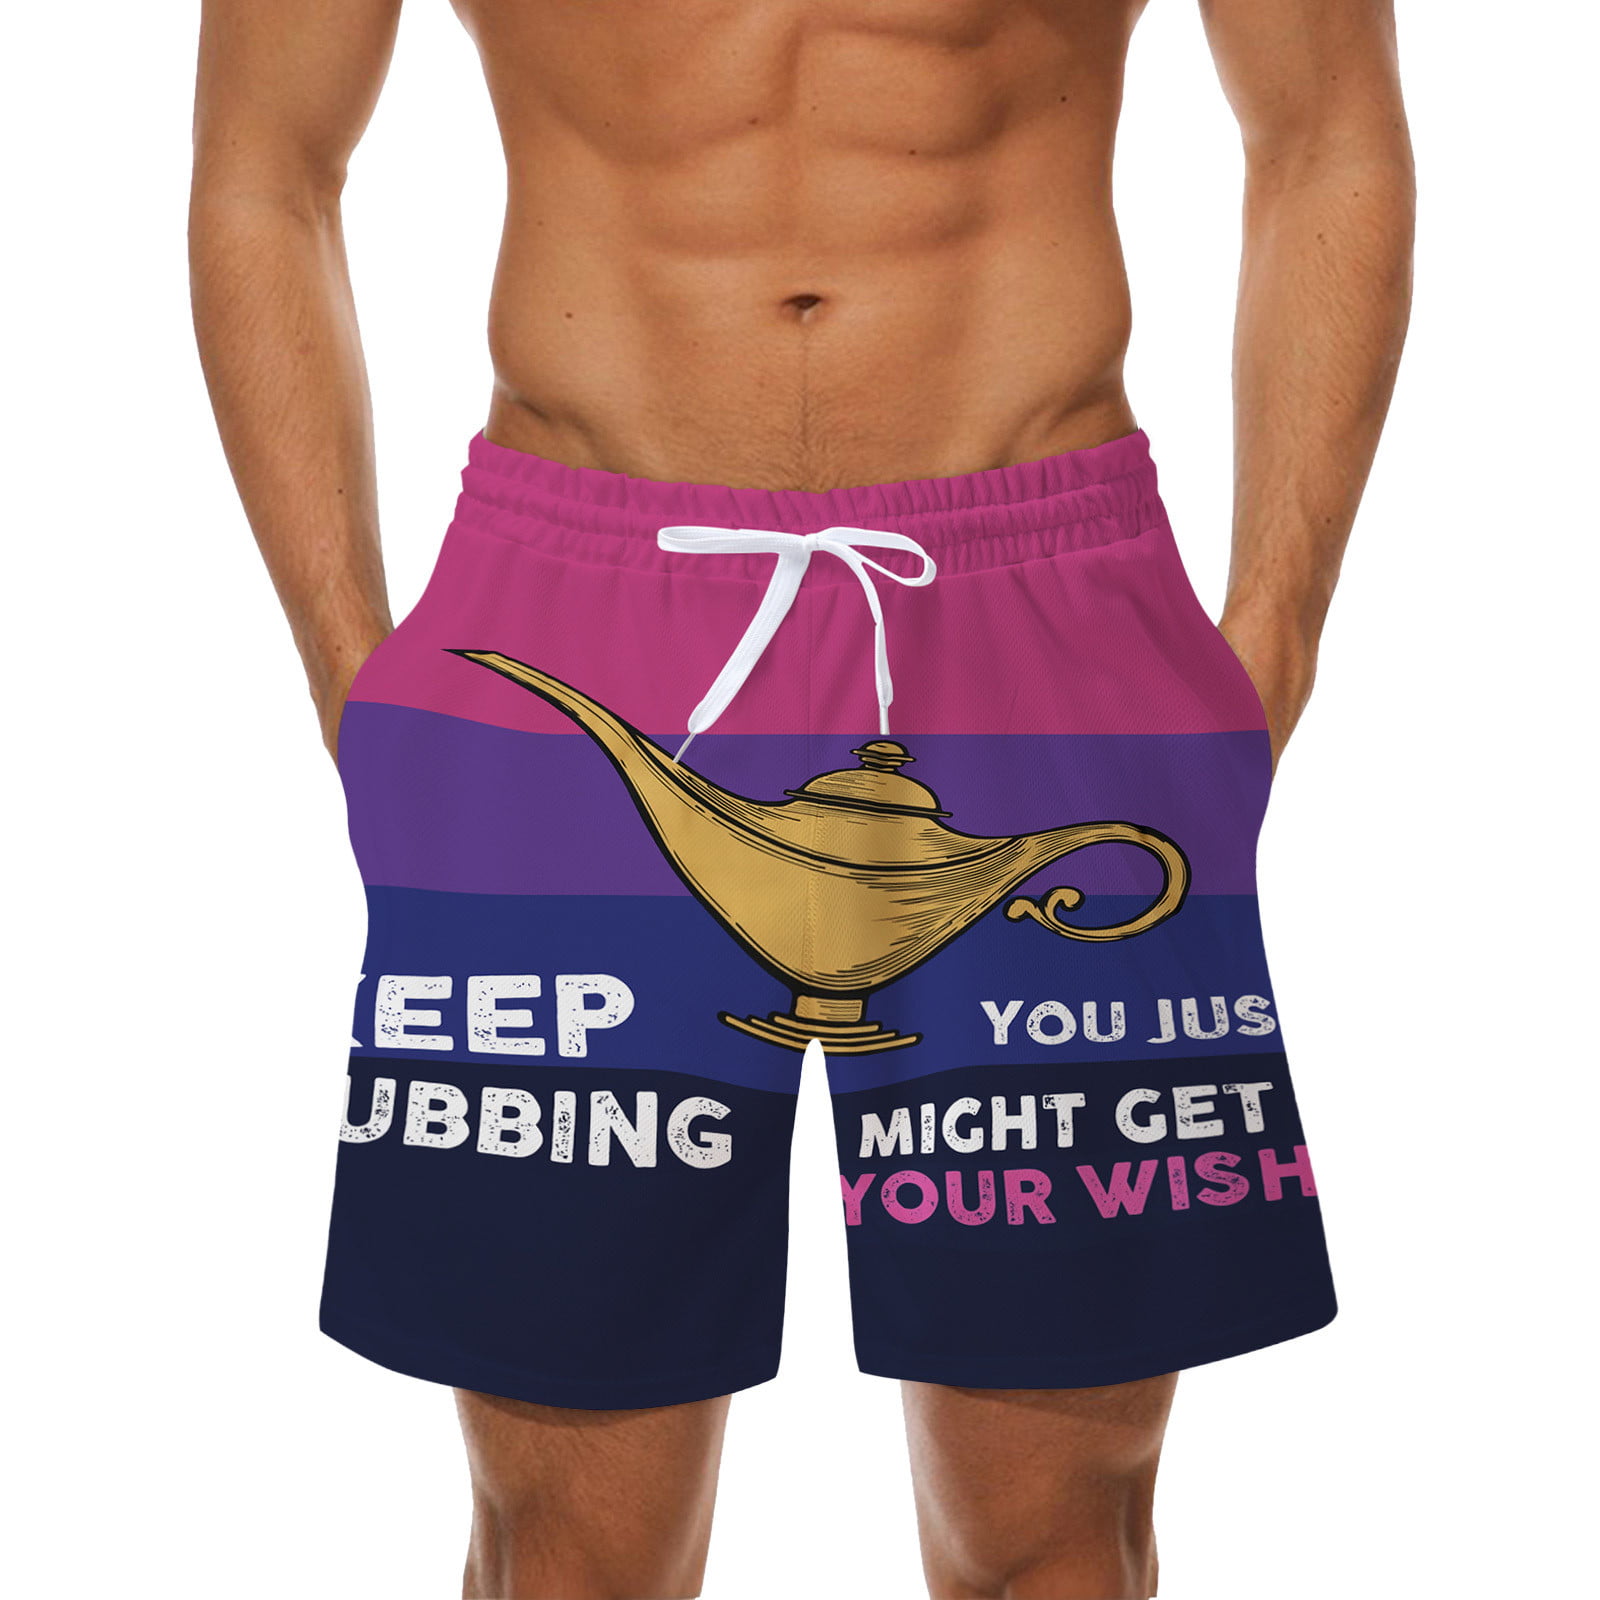 Mens Funny Swim Trunks Gift for Brother Boyfriend Board Shorts with Mesh  Lining Beachwear Pants 